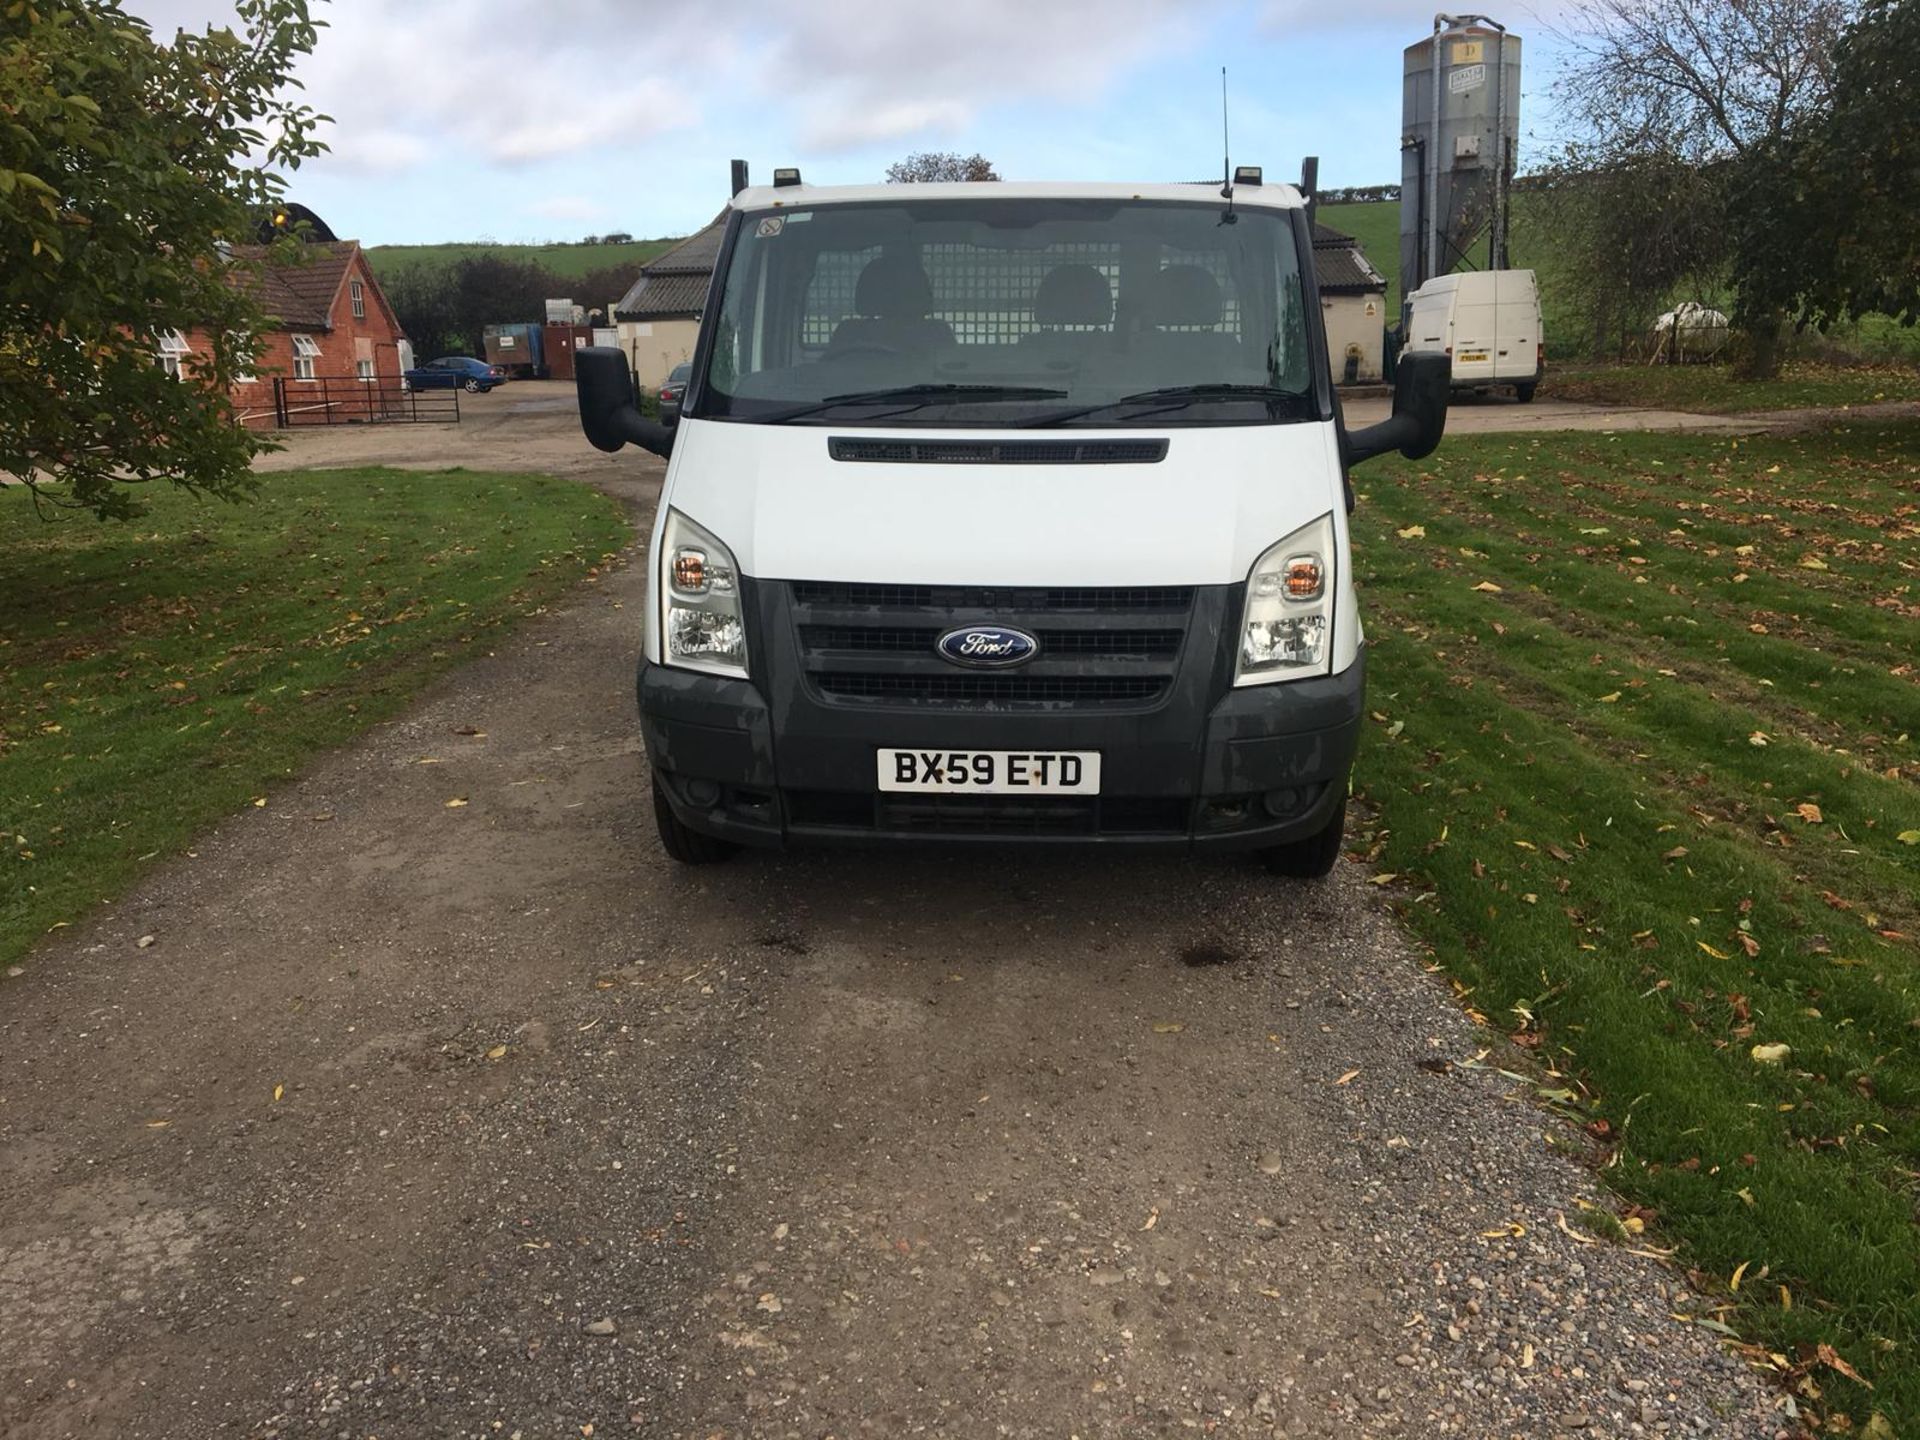 2010/59 REG FORD TRANSIT 100 T350M RWD WHITE DIESEL TIPPER, SHOWING 0 FORMER KEEPERS *NO VAT* - Image 2 of 12